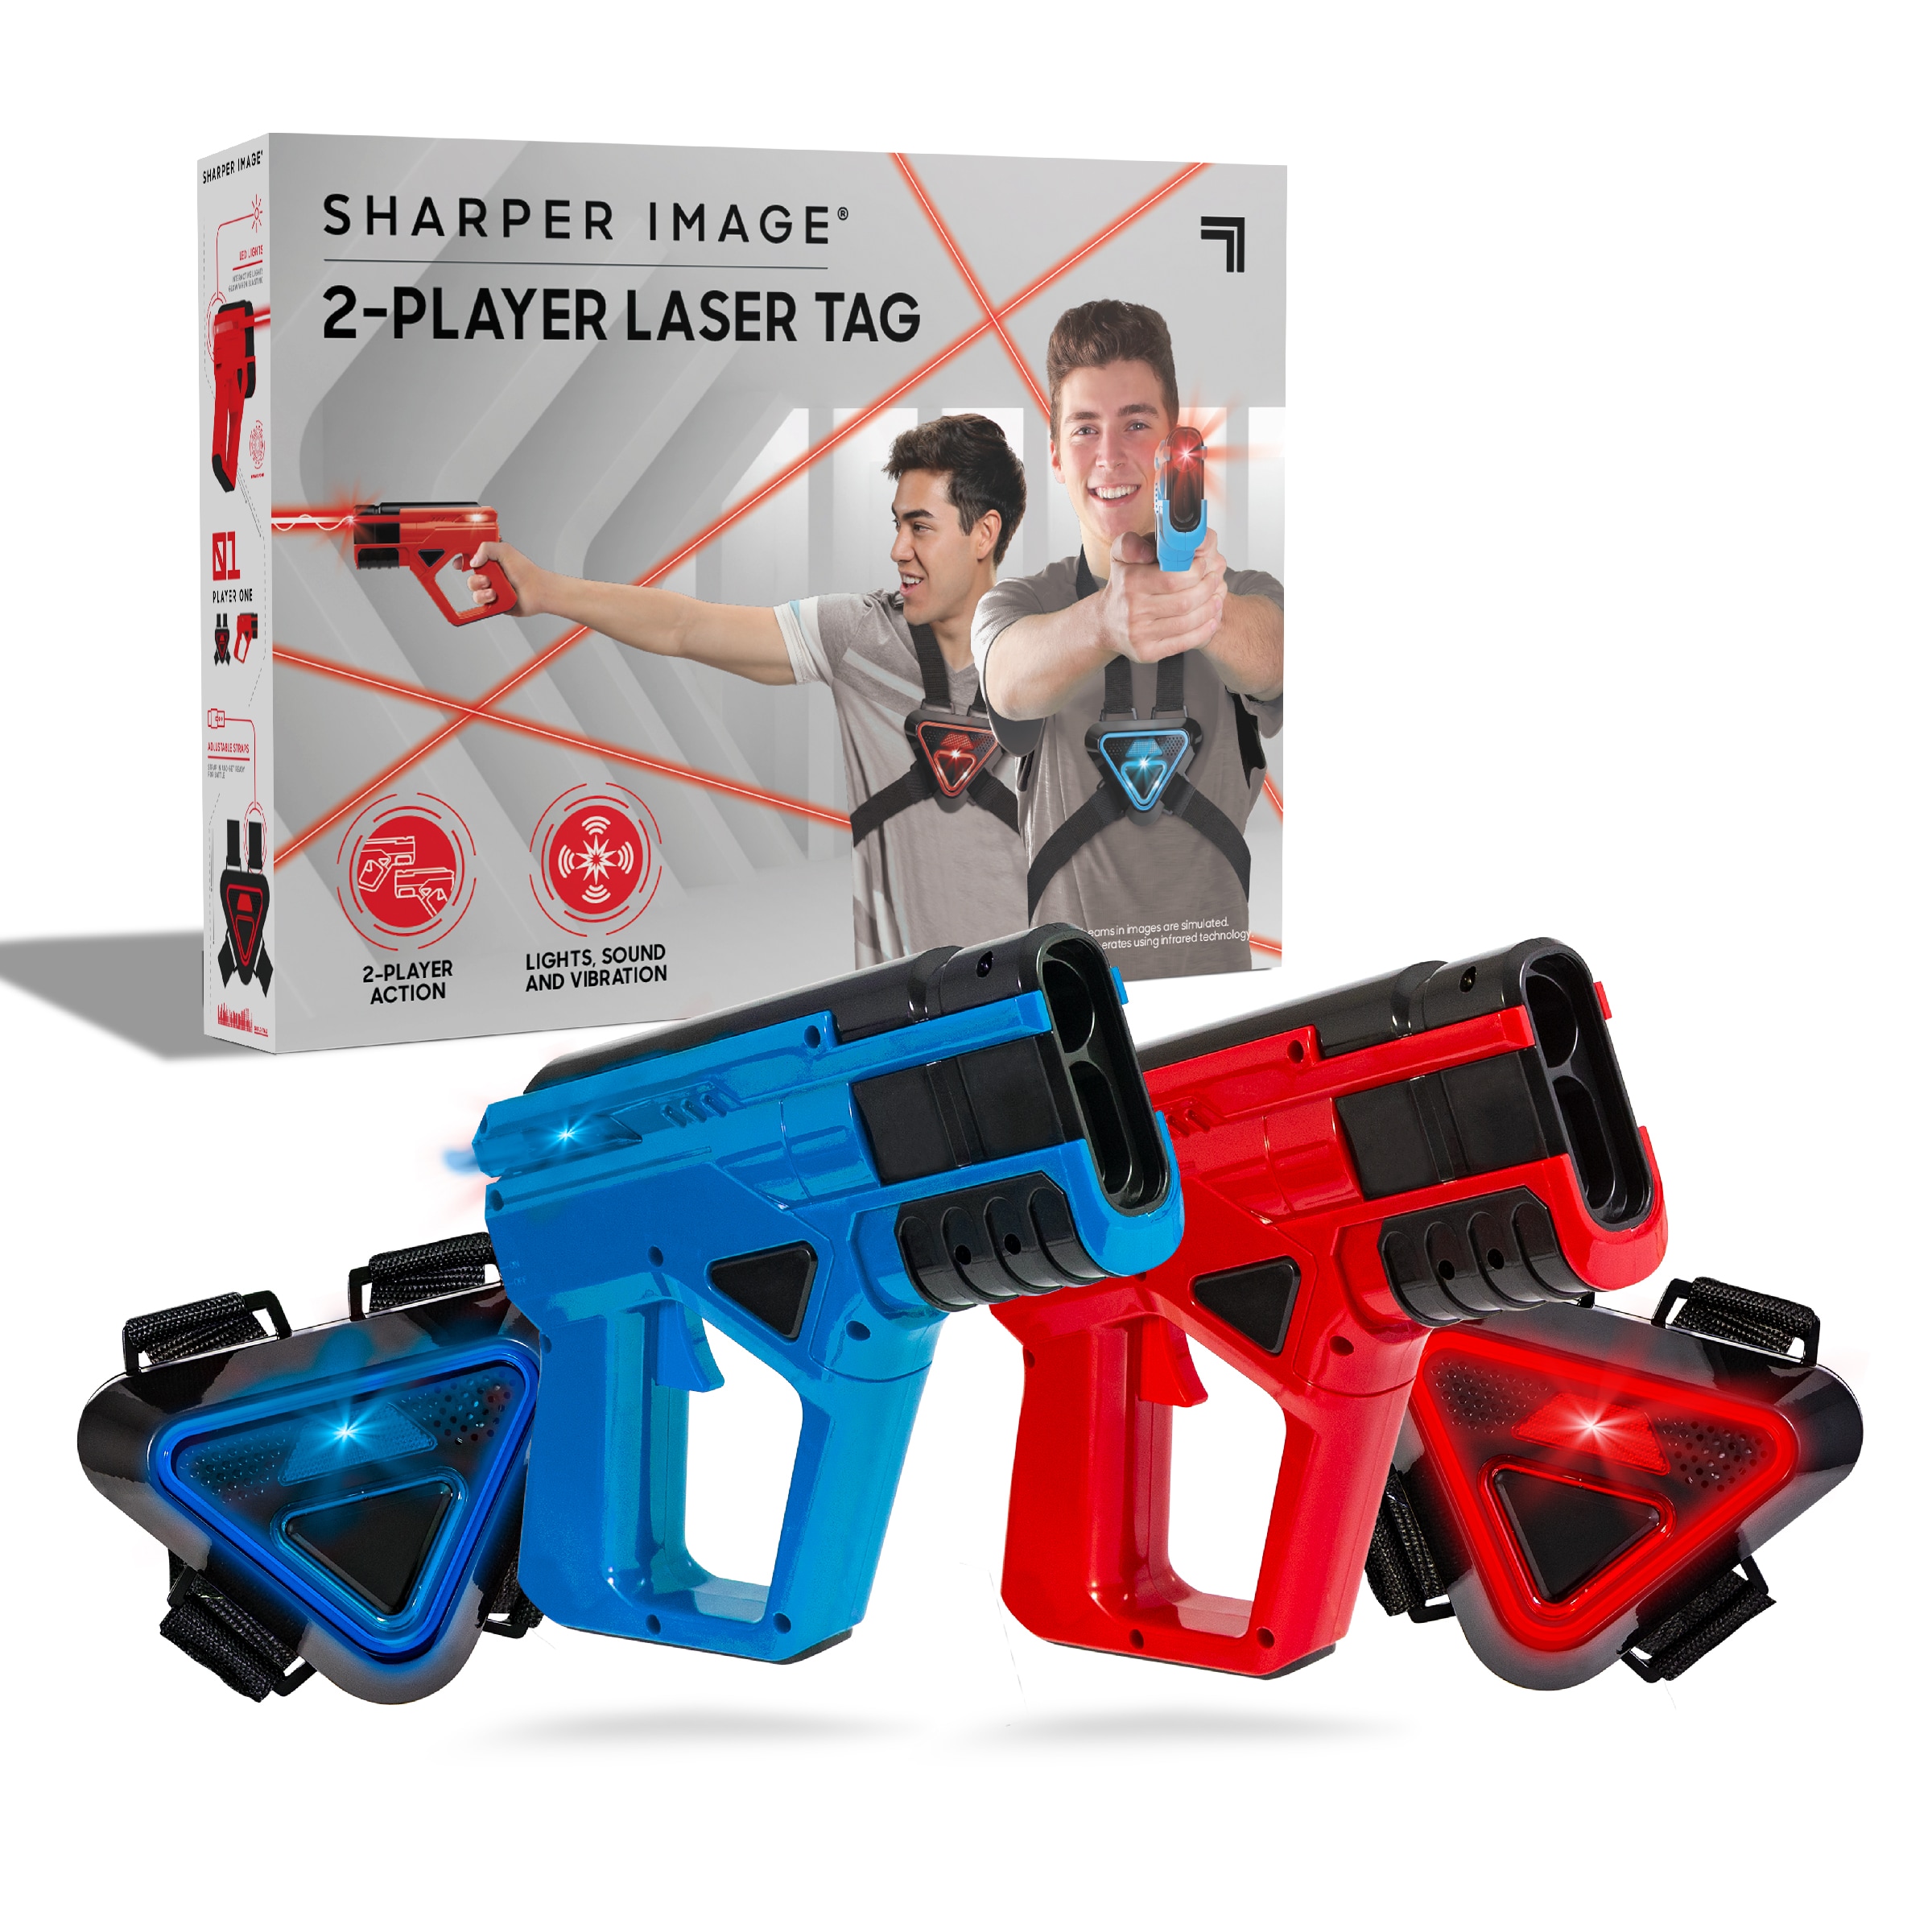 Sharper Image Two Player Laser Tag Set with Light-Up Guns and